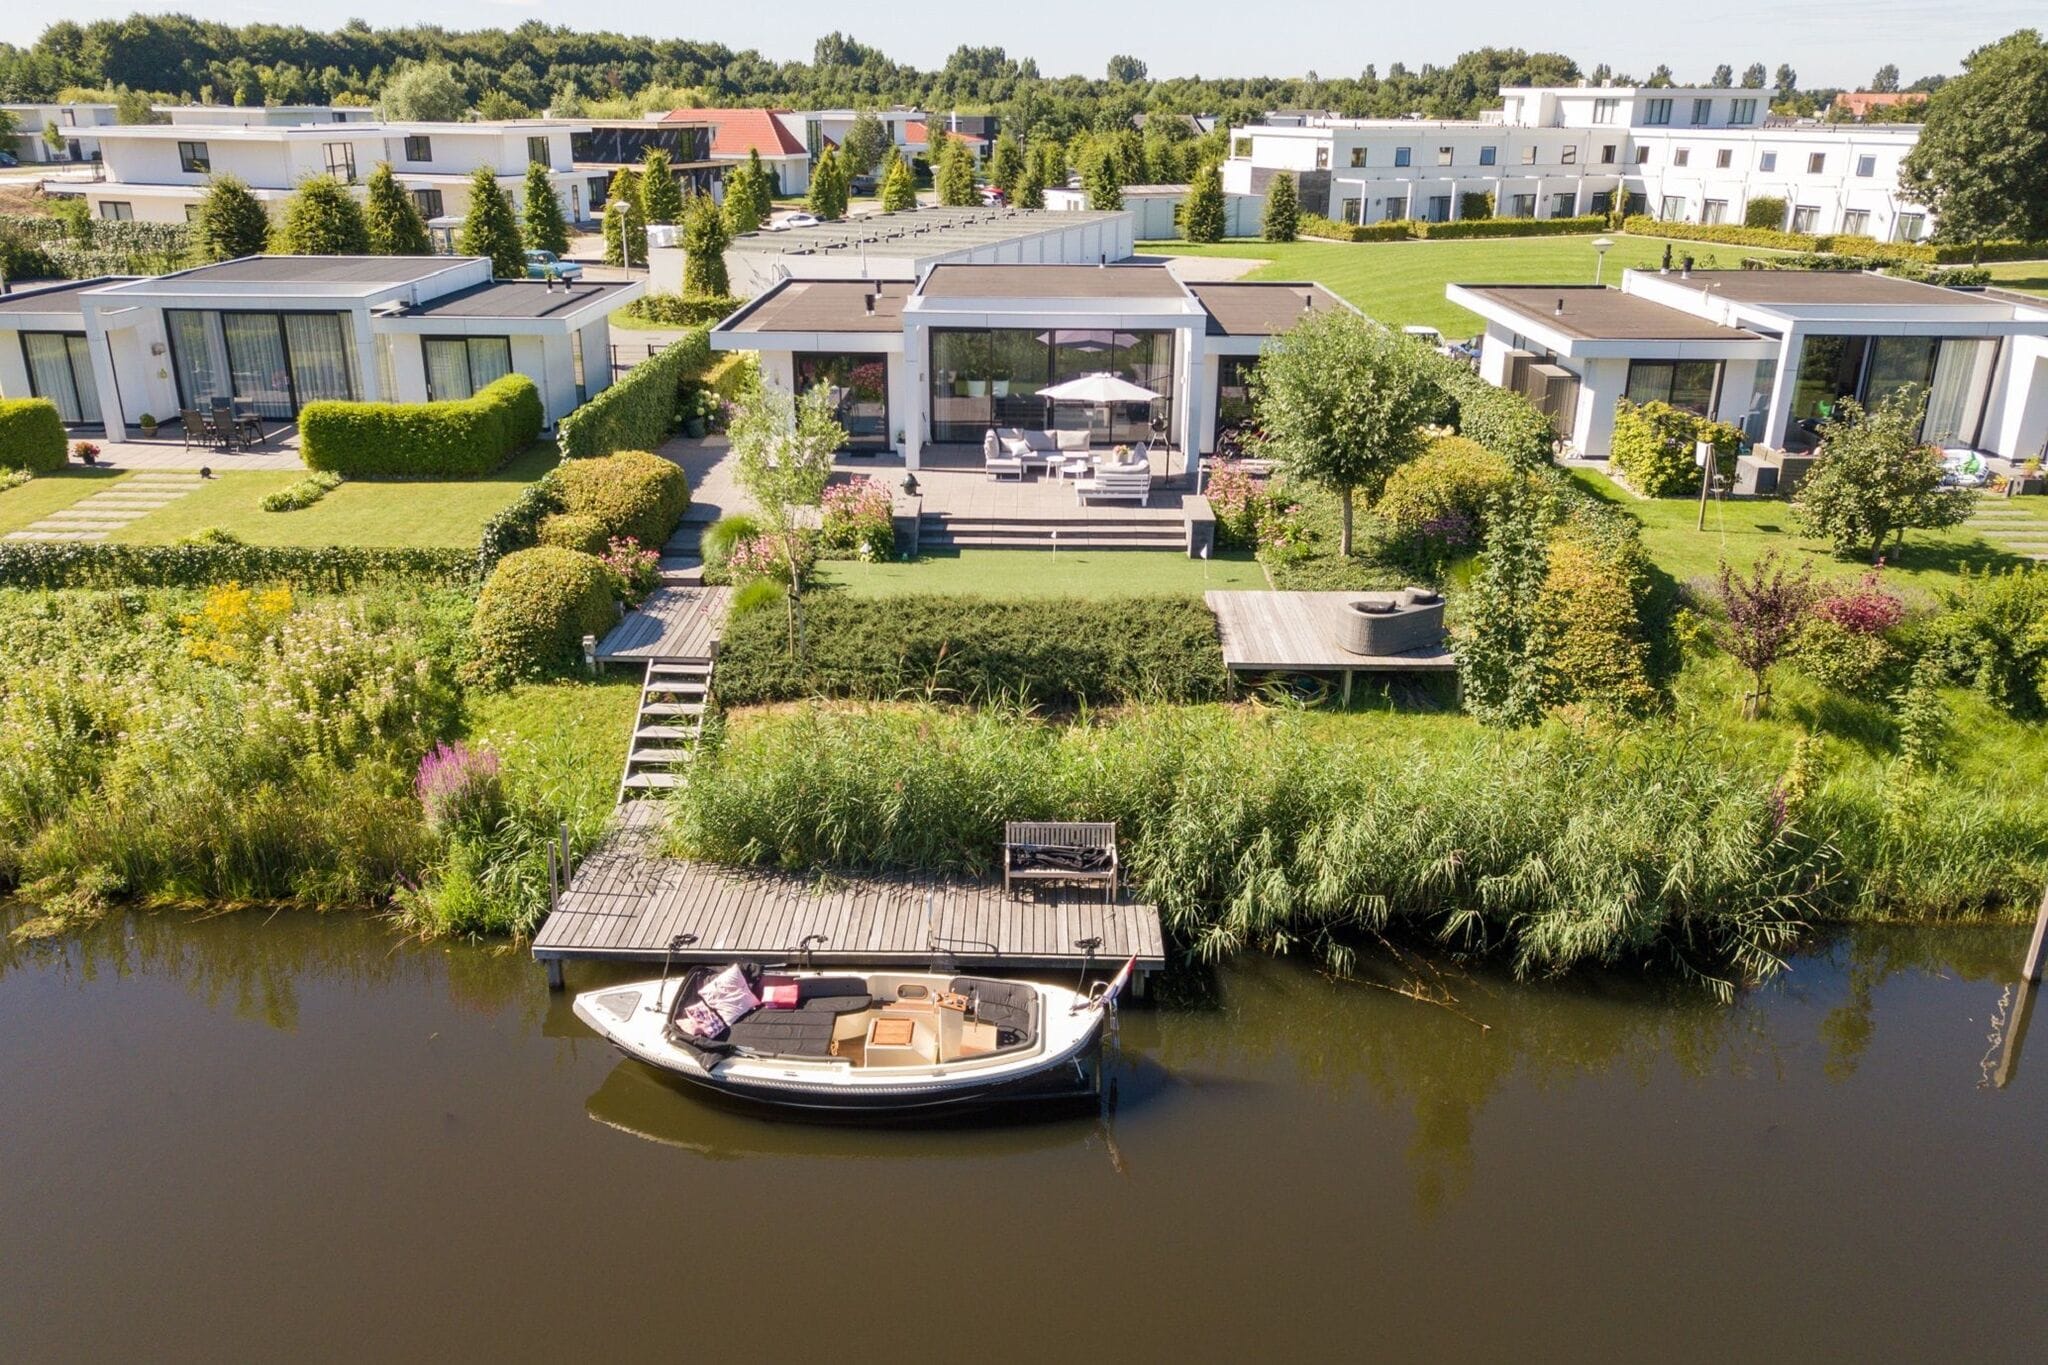 Luxury villa with private jetty in quiet park